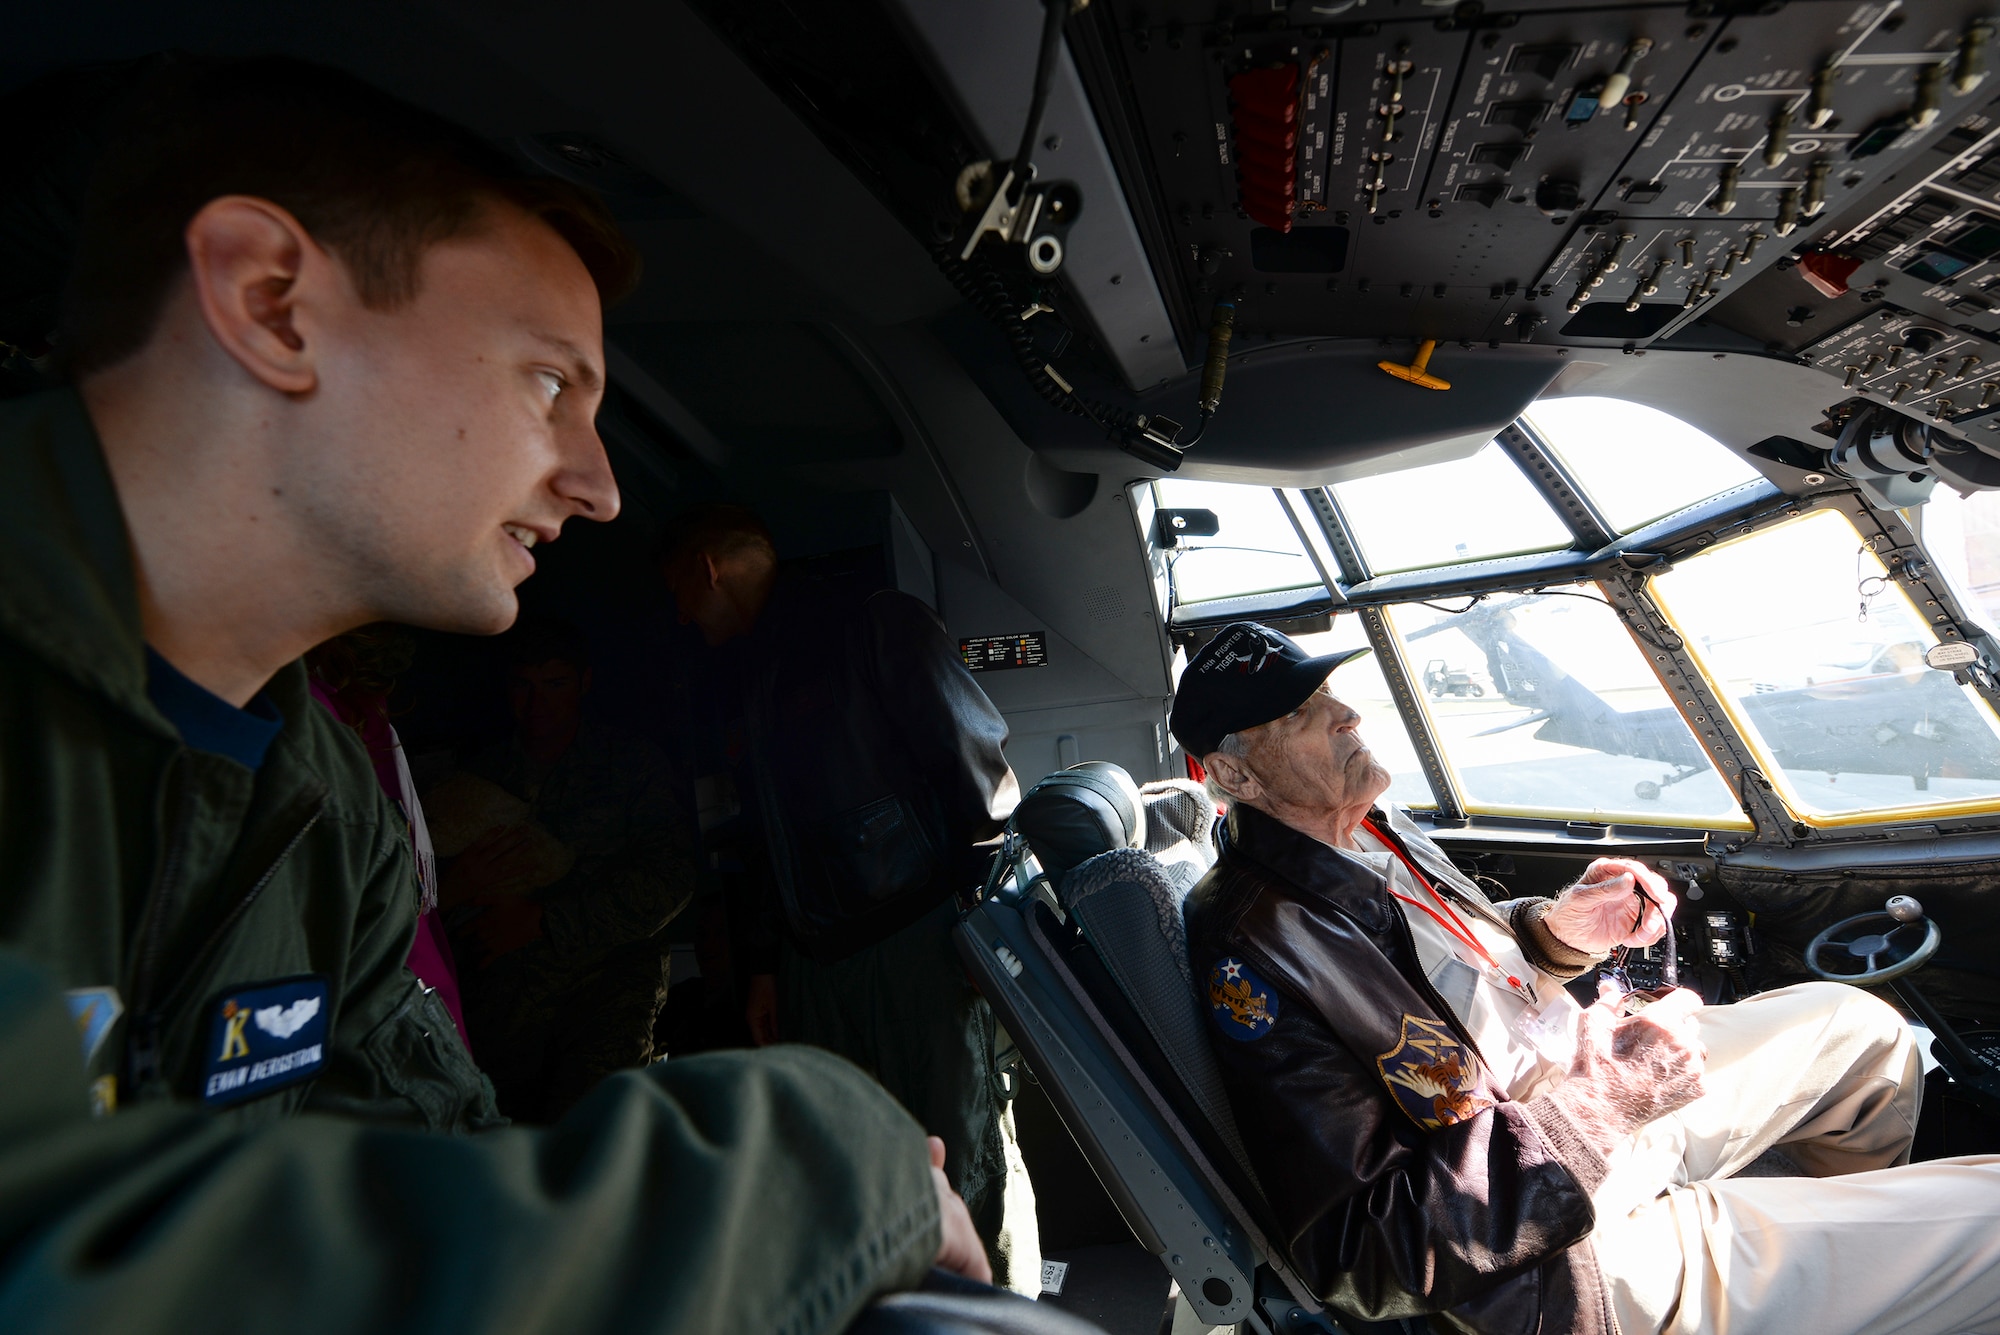 Capt. Evan Bergstrom talks about the upgraded controls in the aircraft with J.M. Taylor during the 2014 Flying Tiger Reunion heritage day, Nov. 14, 2014, at Moody Air Force Base, Ga. Taylor is a former 75th Fighter Squadron pilot and World War II veteran who spent 10 months as a prisoner of war, including two months in solitary confinement. Bergstrom is a 71st Rescue Squadron HC-130J Combat King II pilot. (U.S. Air Force photo/Master Sgt. Sonny Cohrs) 